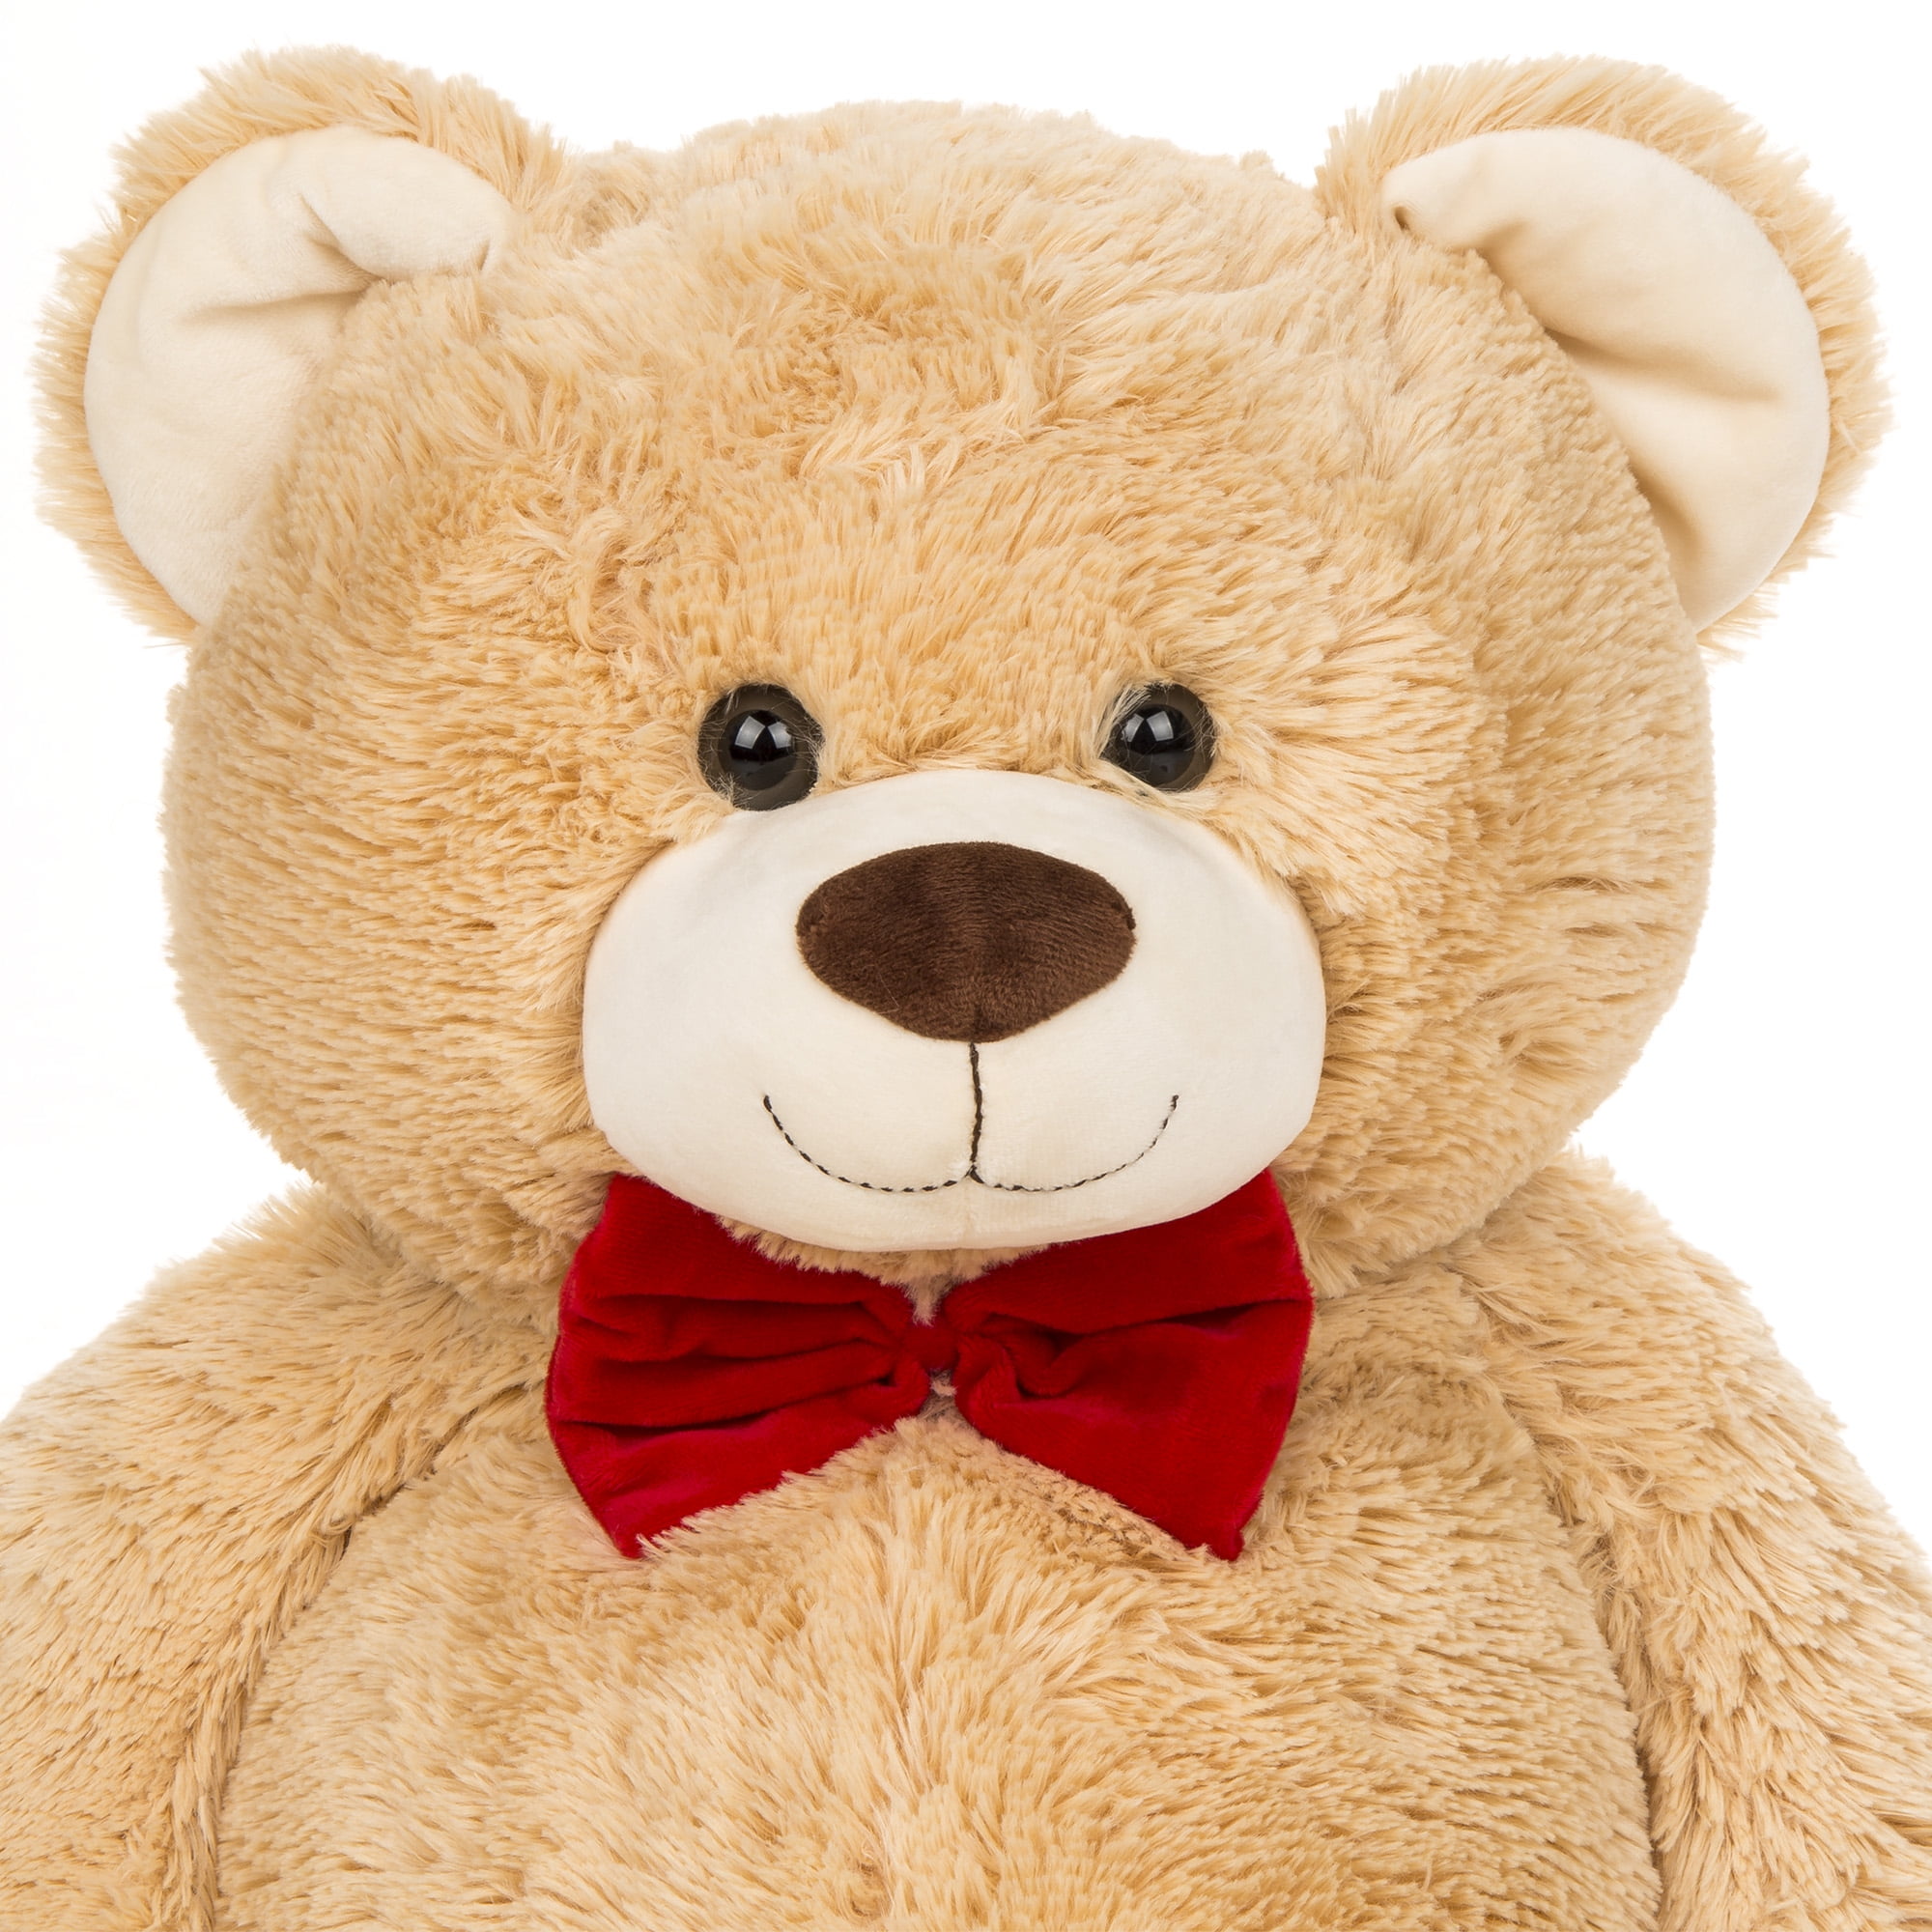 brown teddy bear with red bow